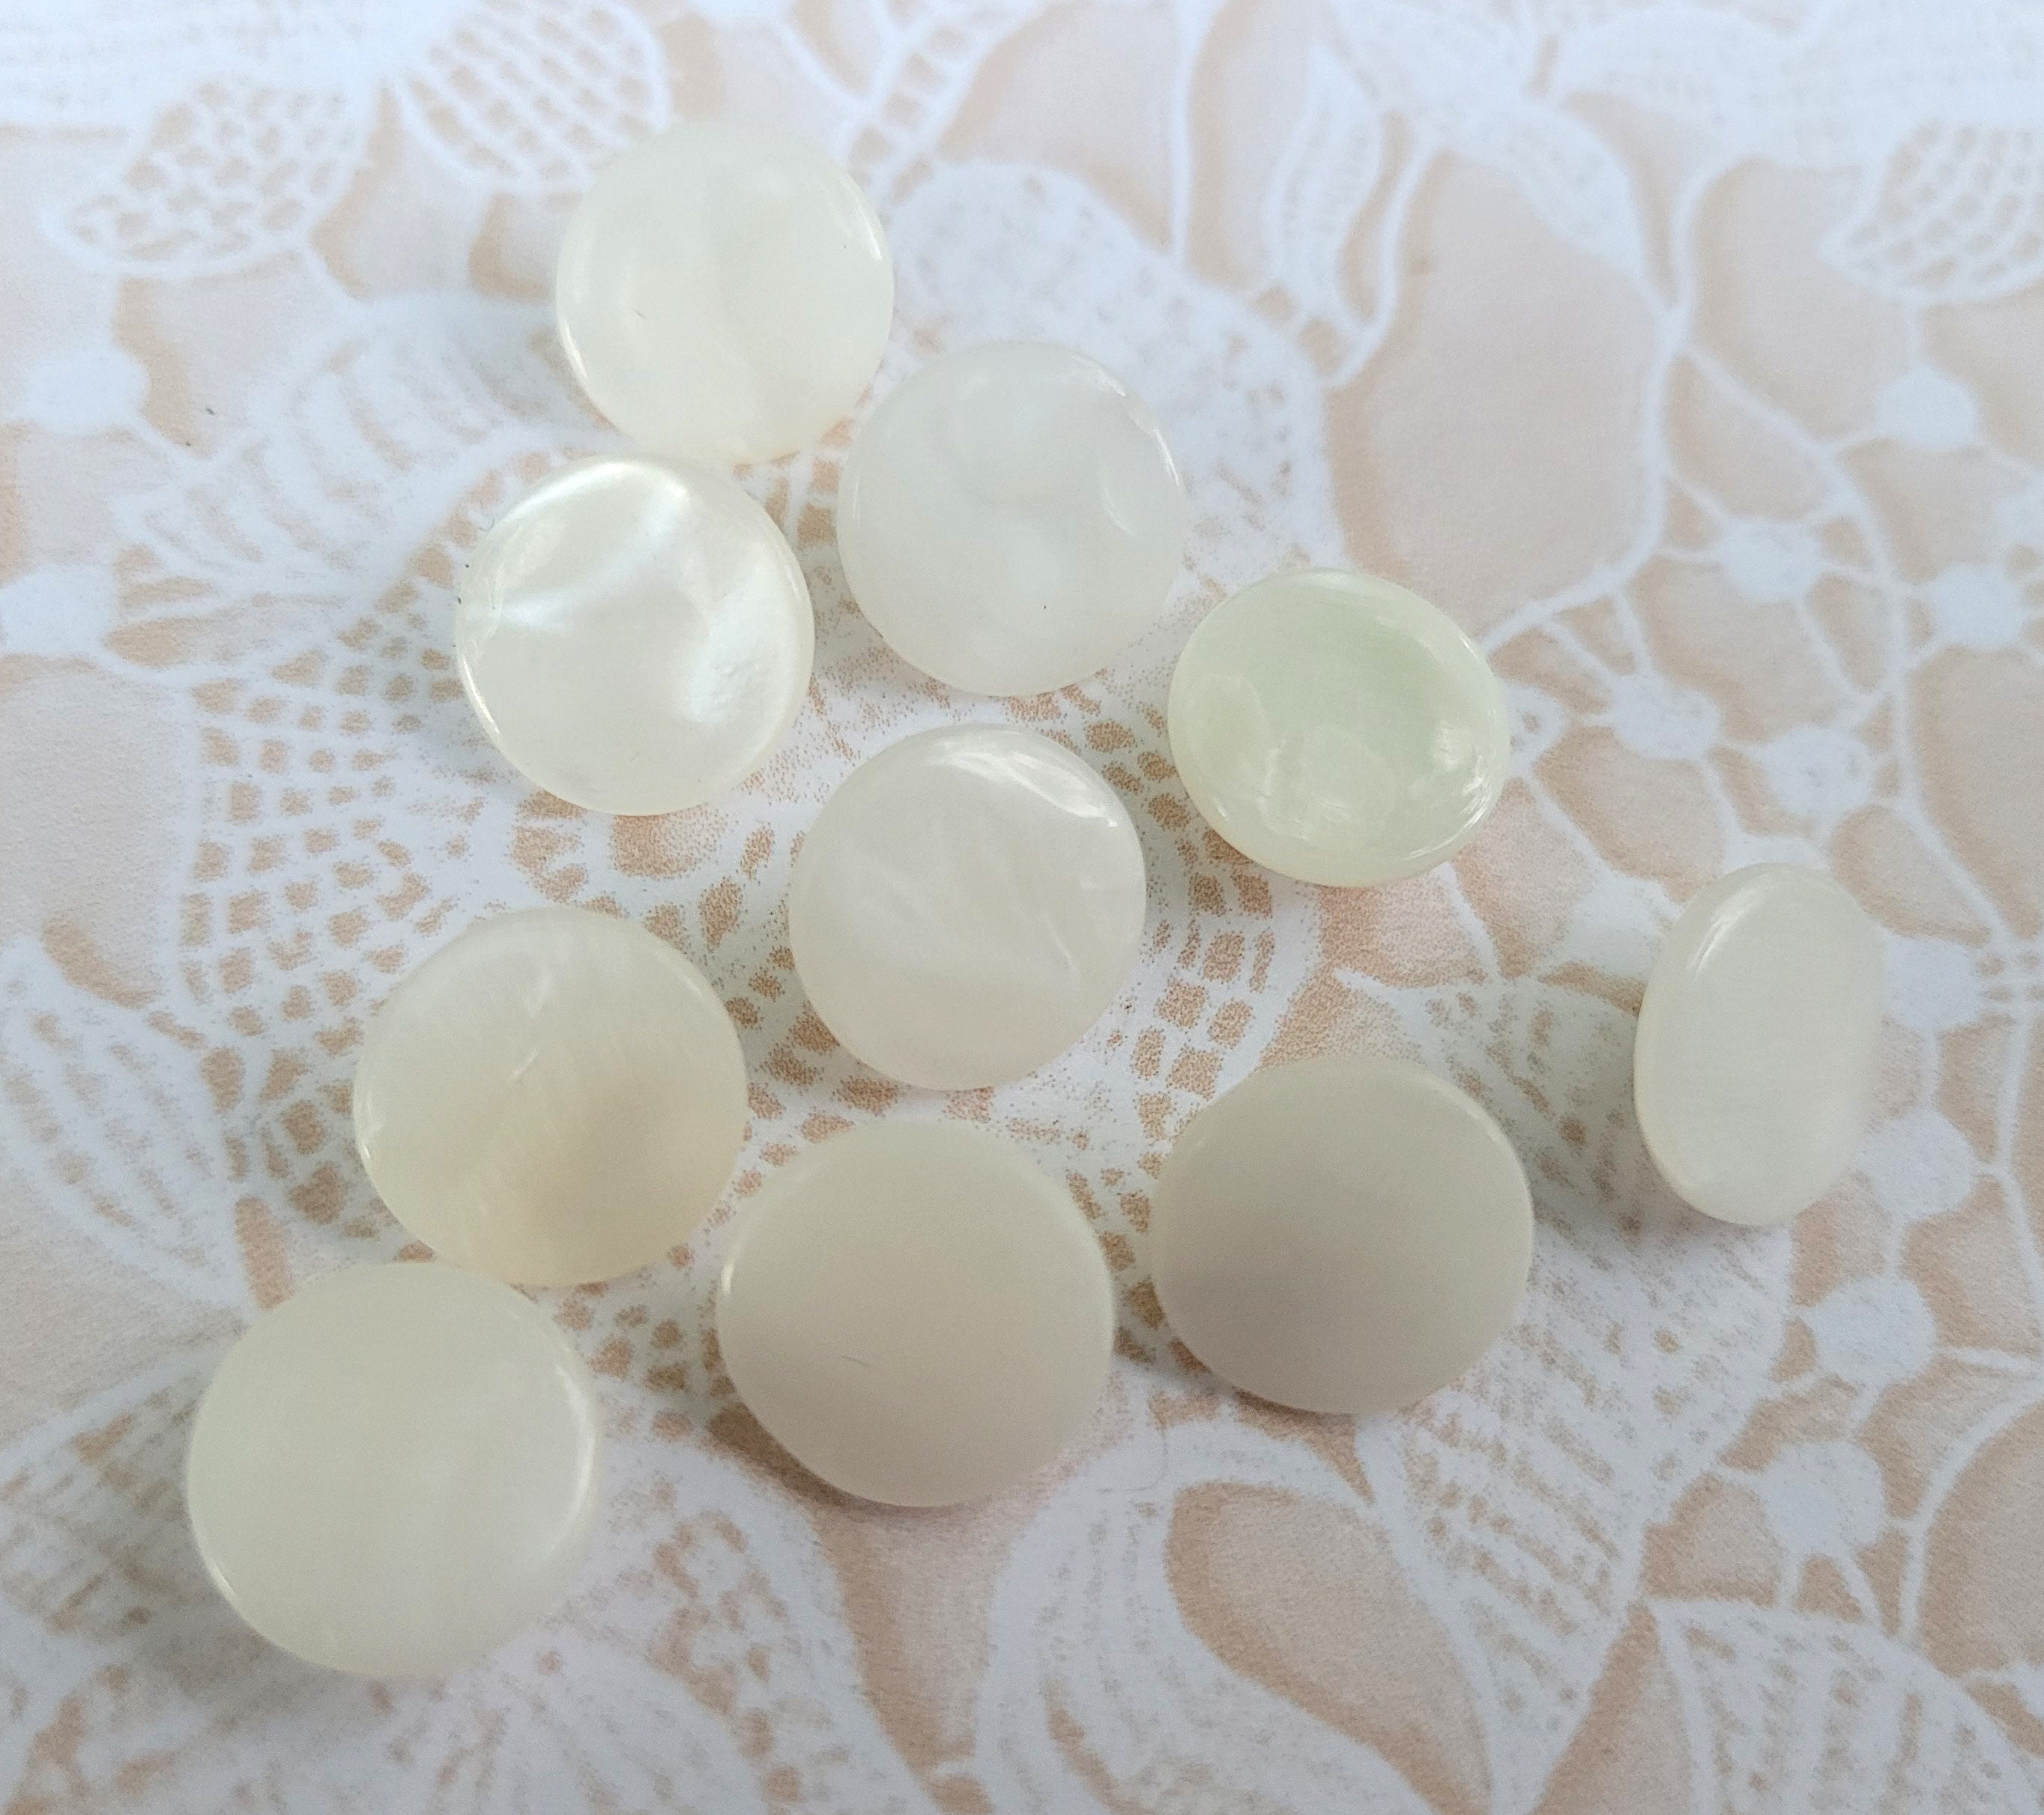 250pcs Mixed 6 Sizes 6, 8,9,10,12,14mm Imitation Pearl Buttons for Sewing  Handmade Loose Buttons Sewing Accessories Wholesale -  Finland